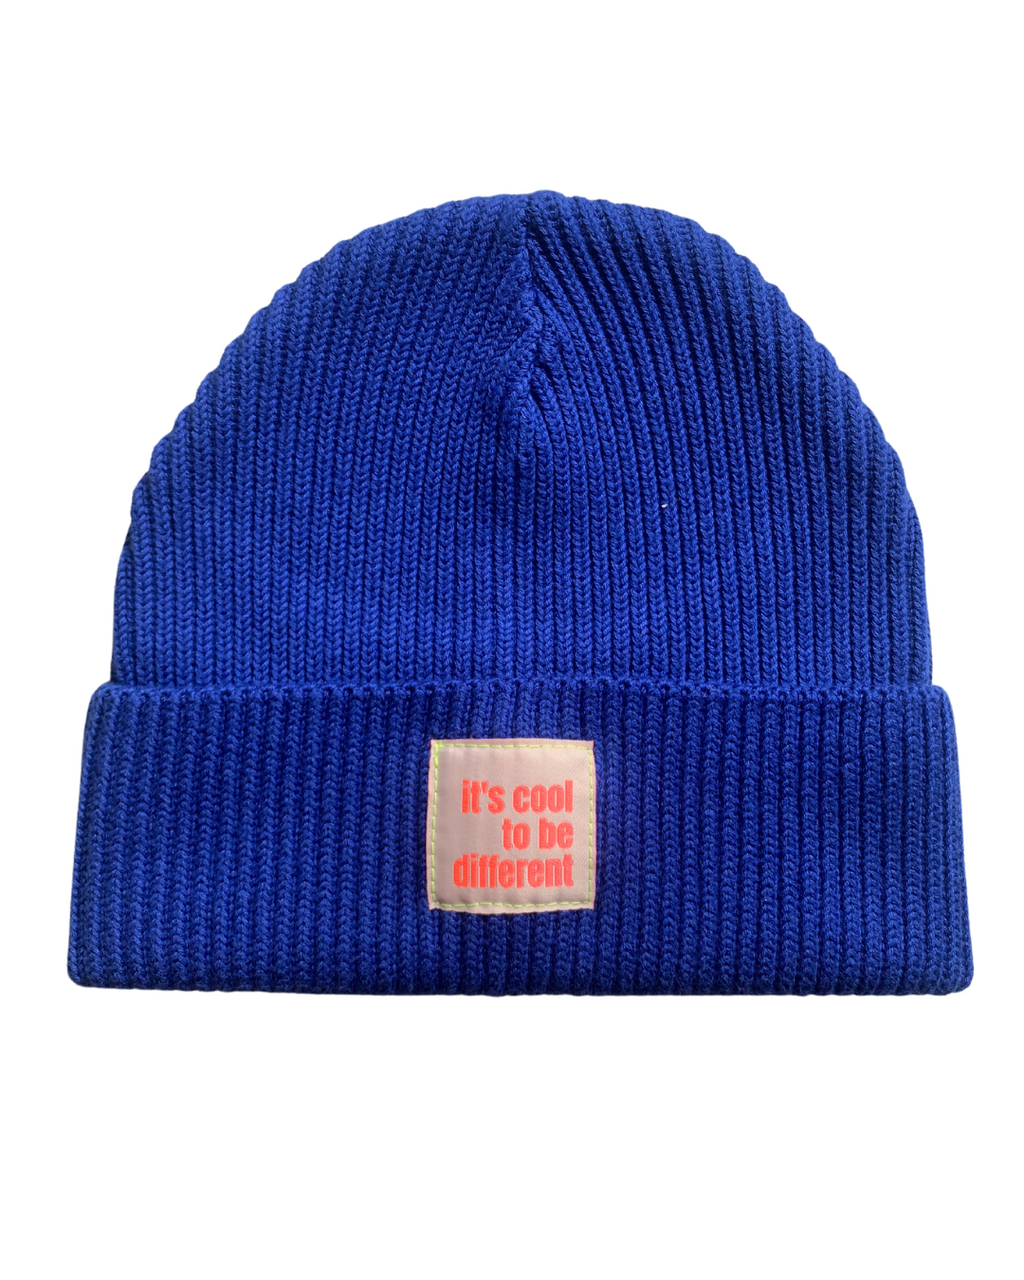 Special Edition Fisherman Beanie  - royal blue